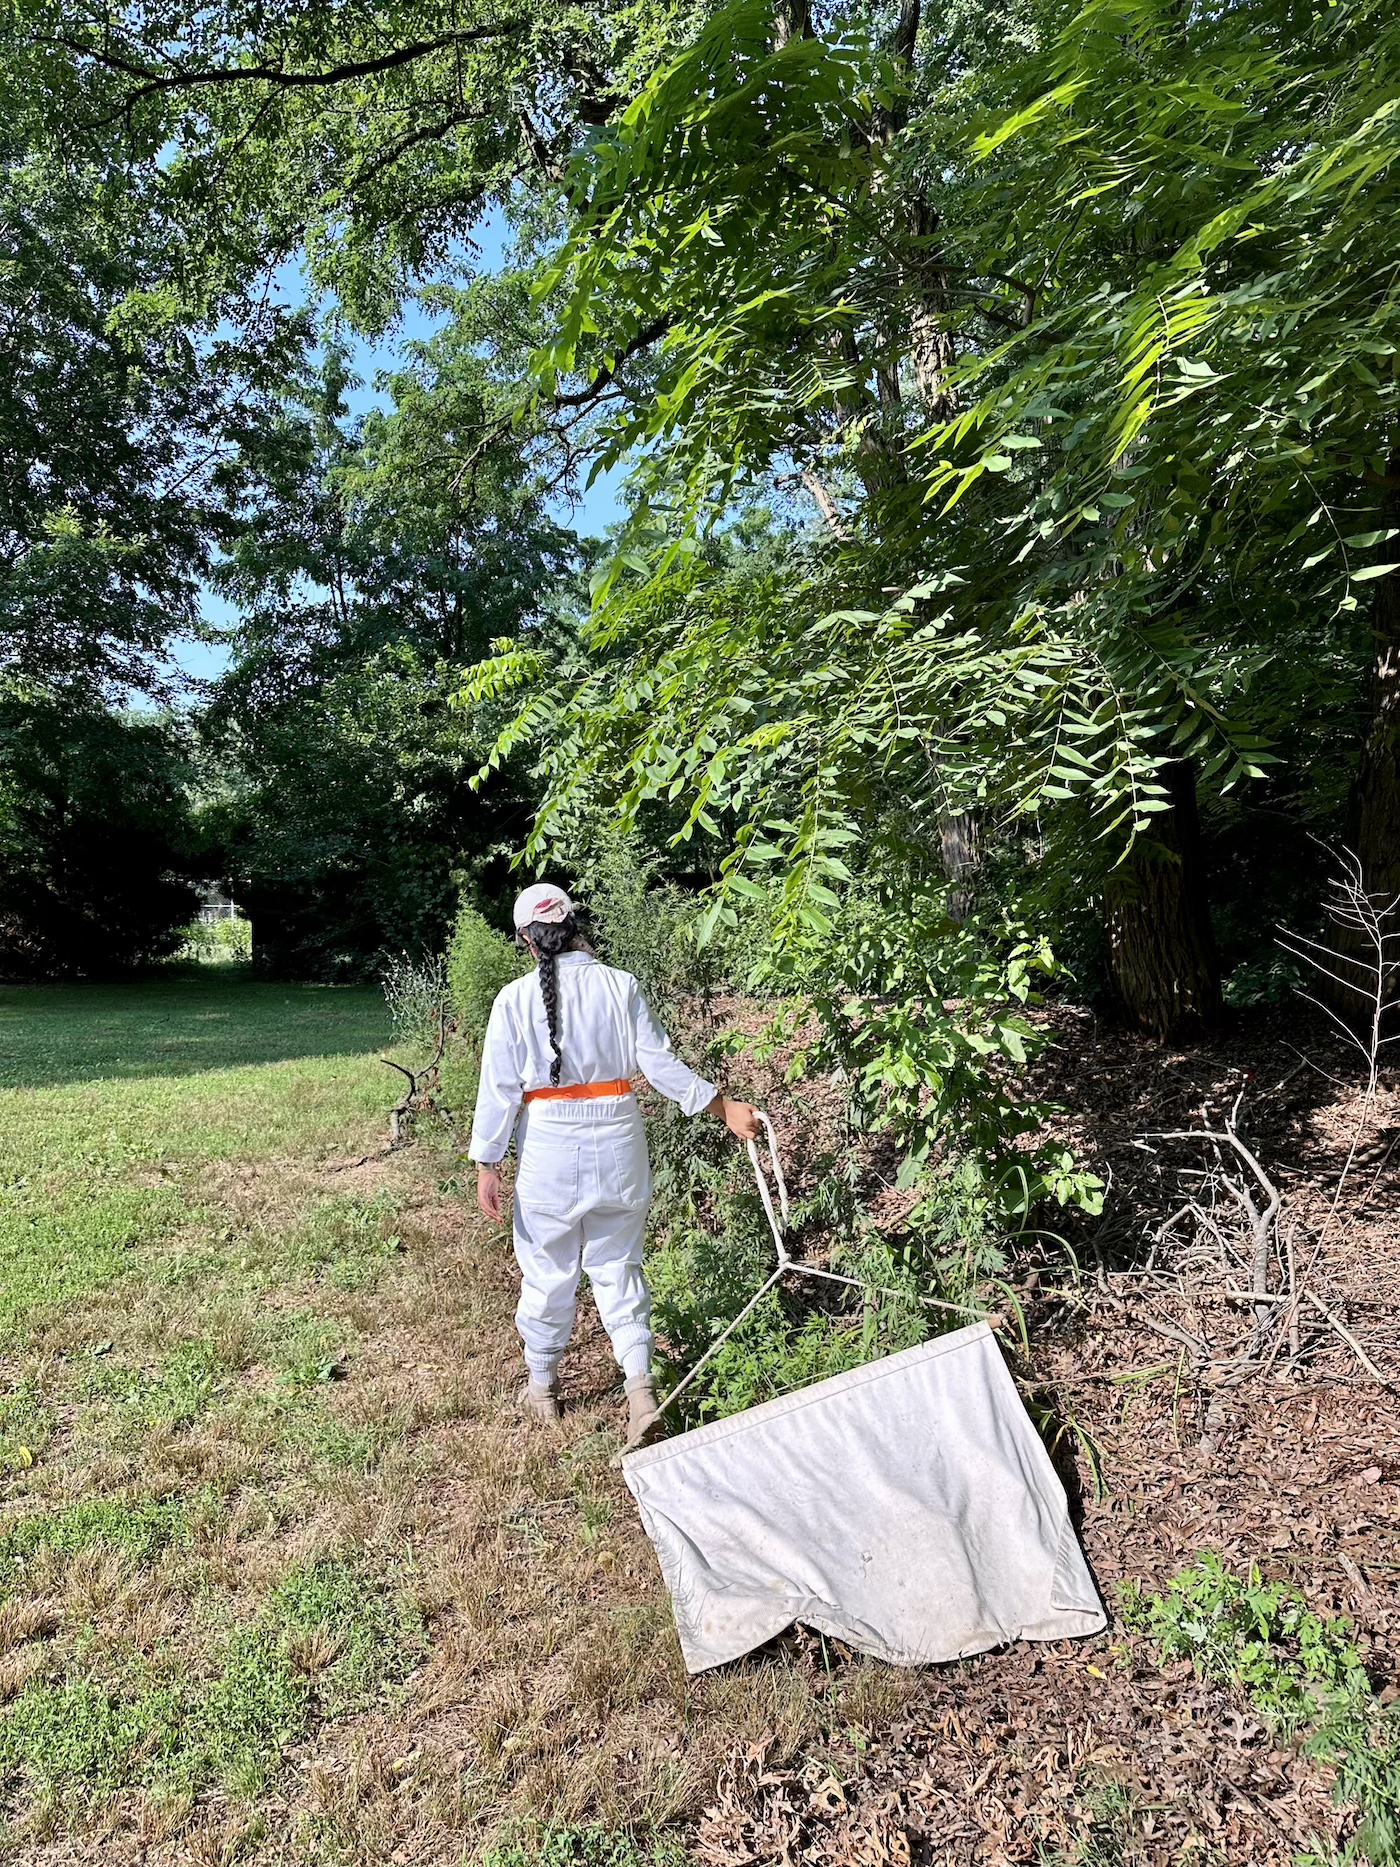 A person wearing all white drags a sheet across the ground in an outdoor green space.